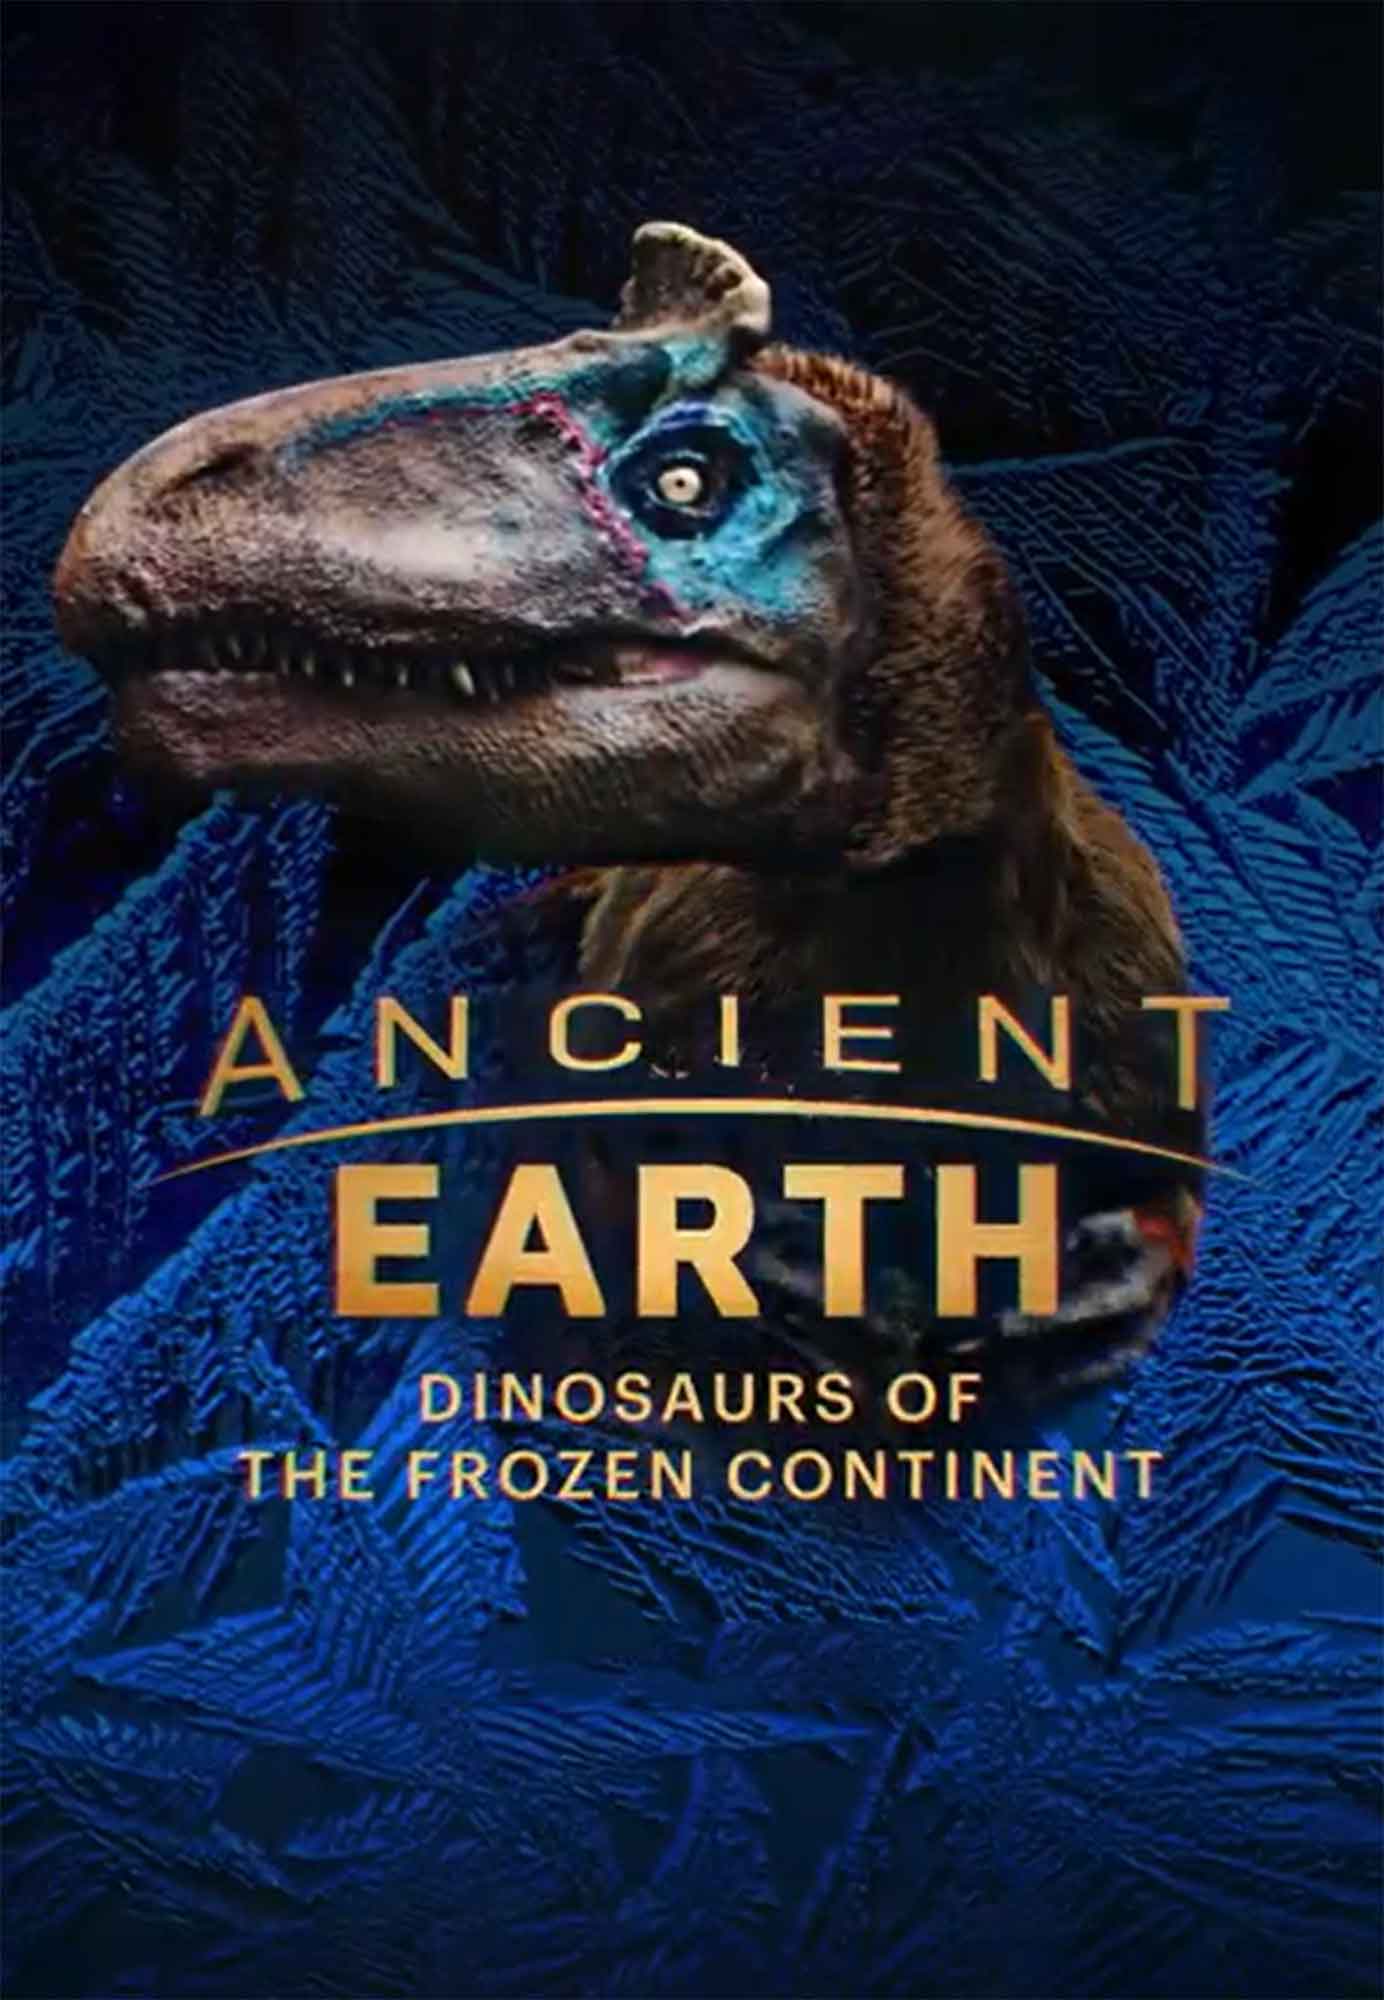 Dinosaurs of the Frozen Continent